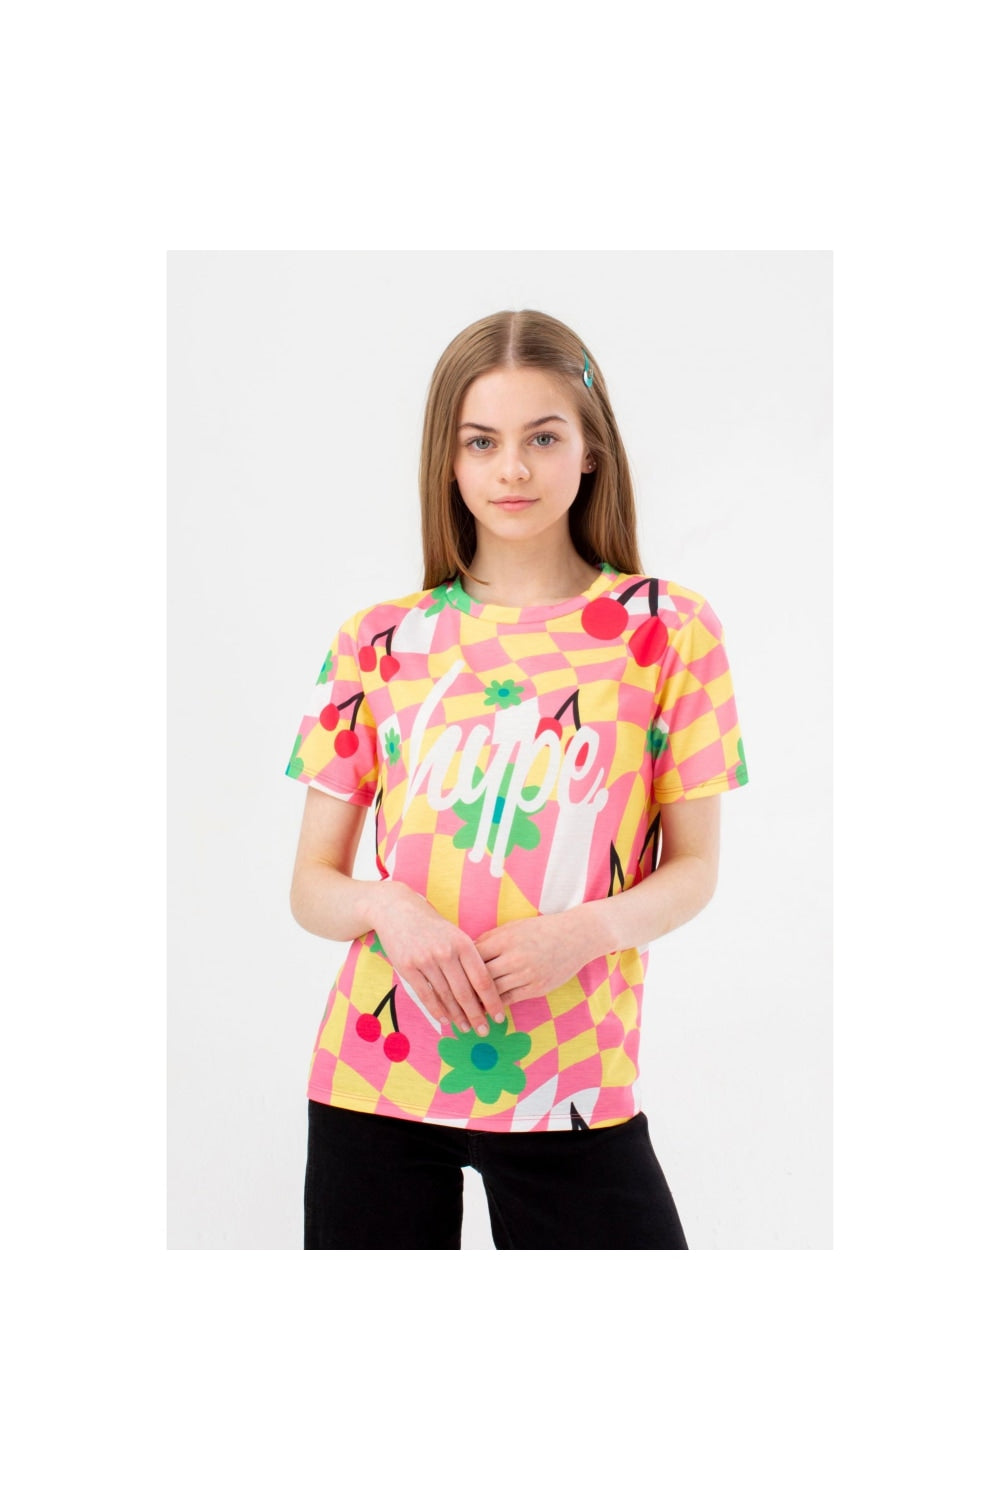 Hype Girls Groovey Wave Script T-Shirt (Multicolored)